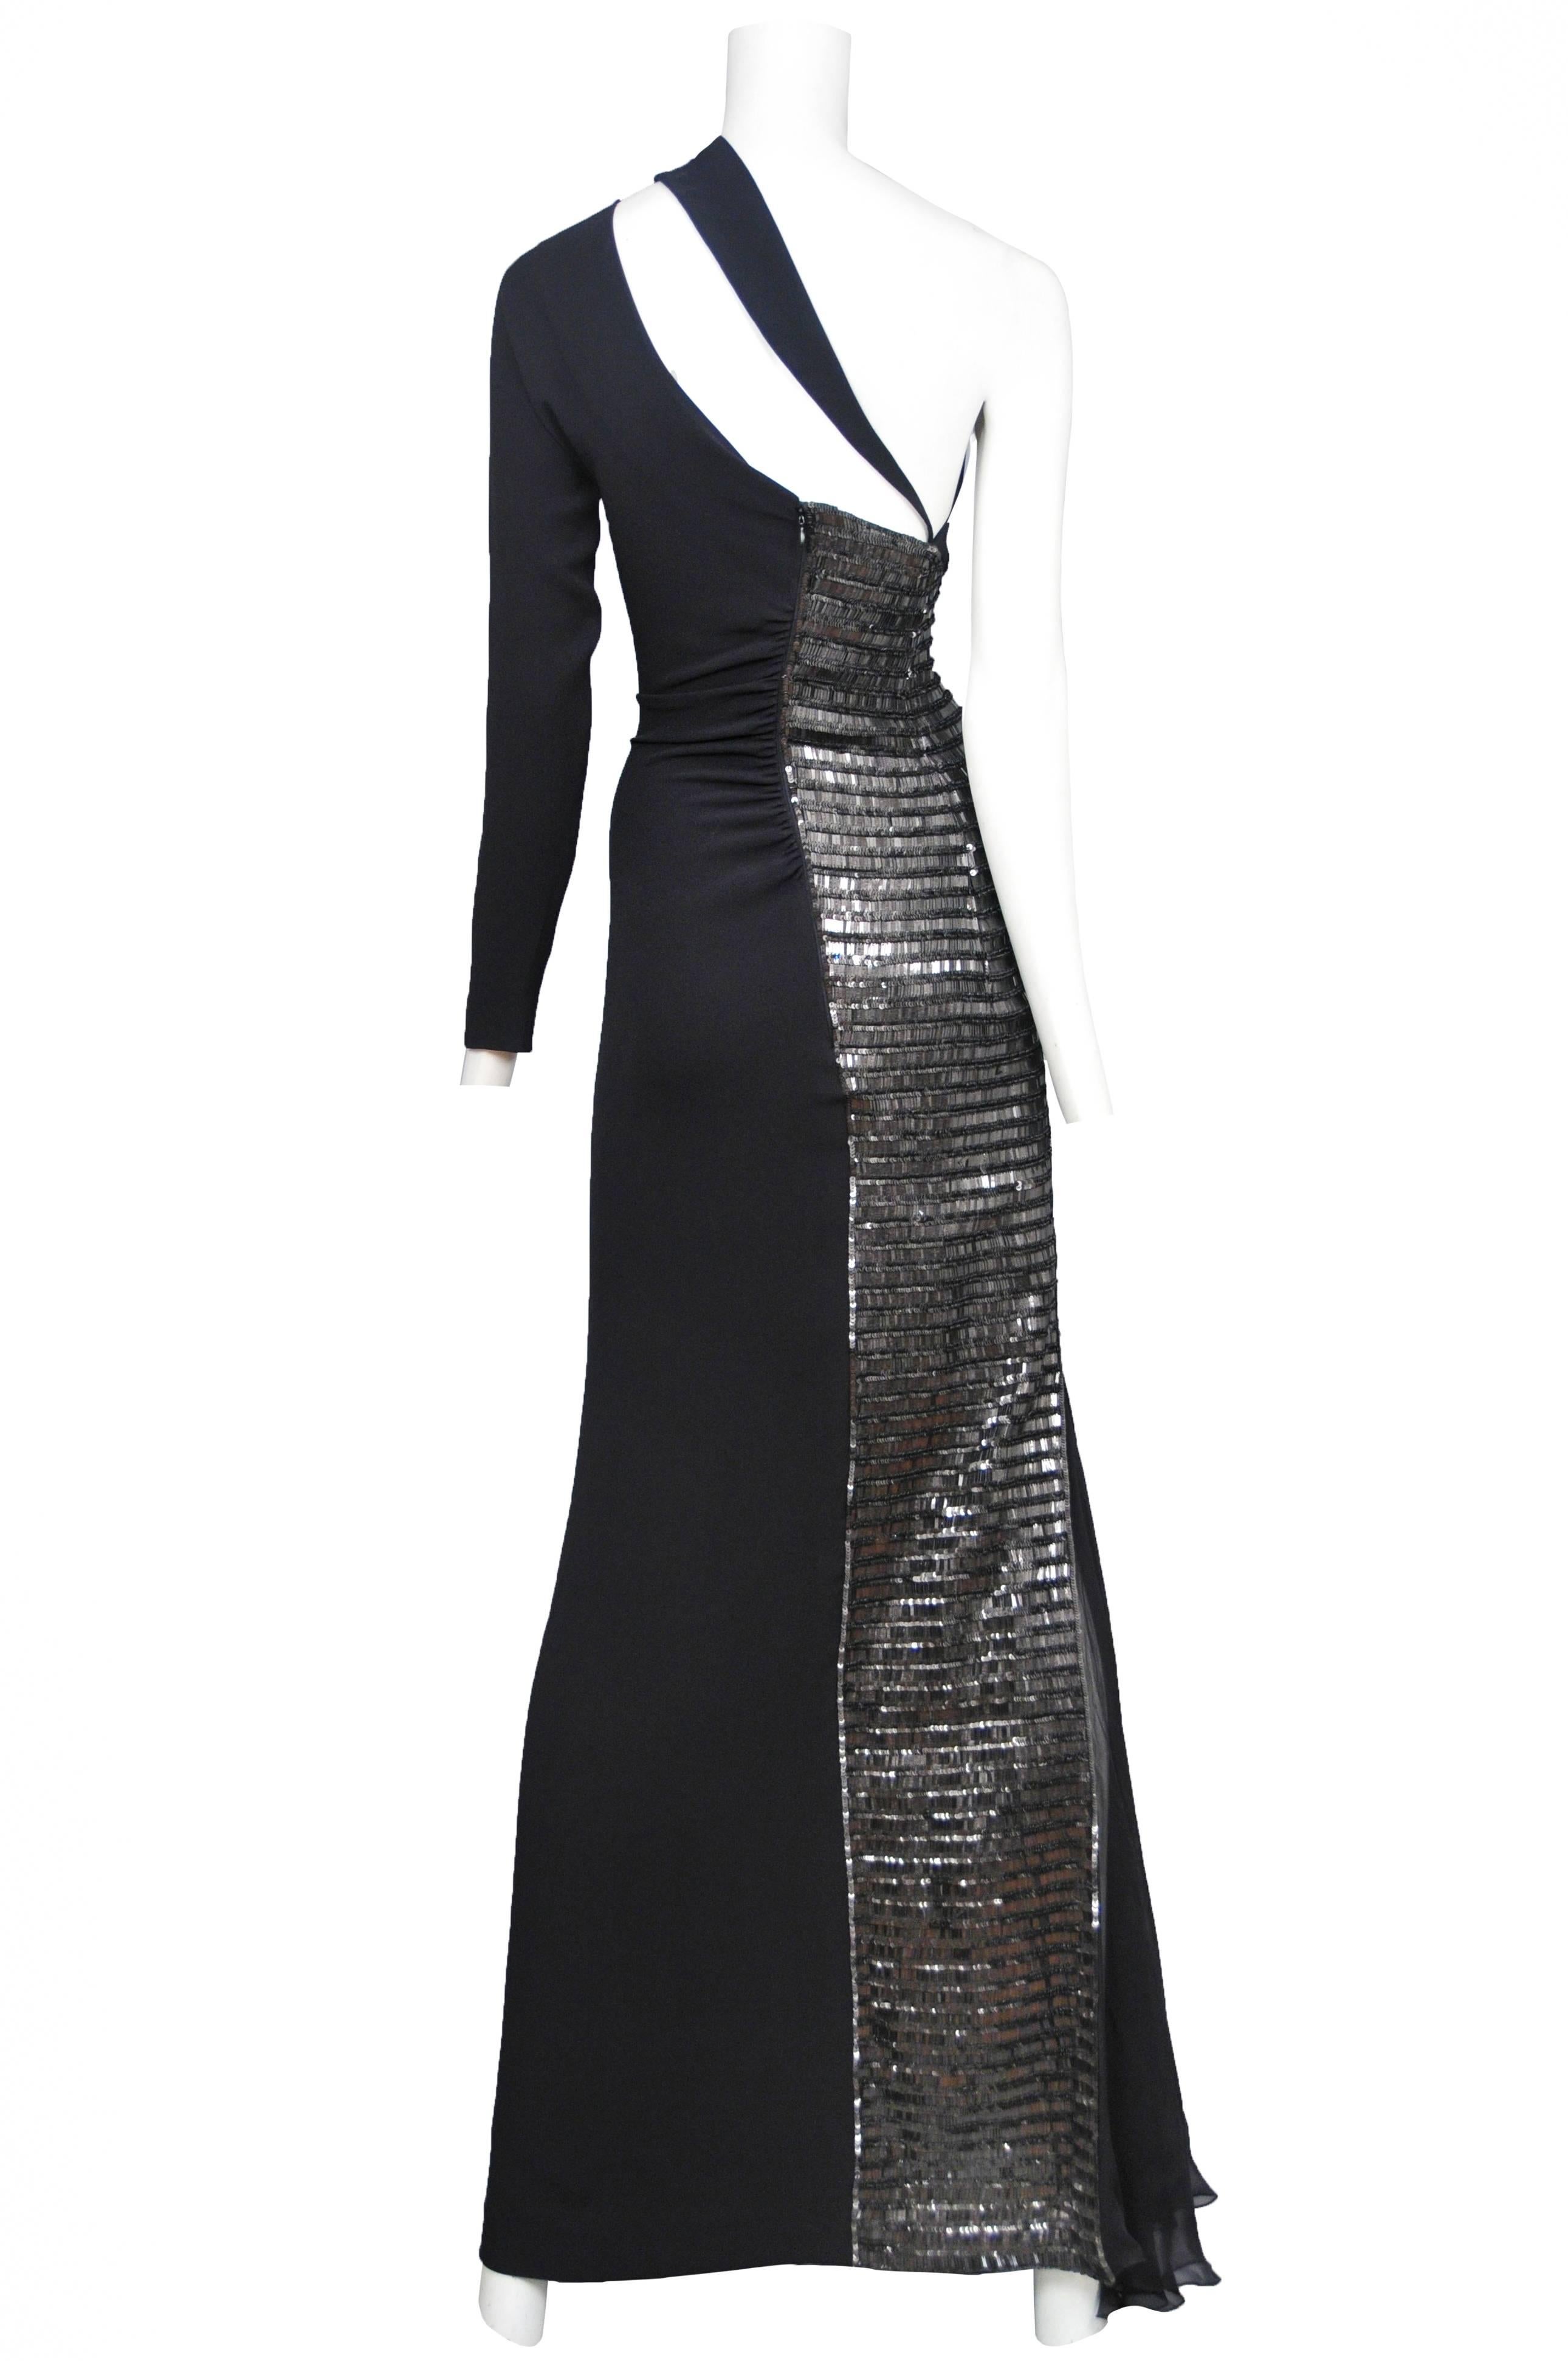 Vintage Gianfranco Ferre black silk and rayon jersey gown featuring an asymmetrical neckline with one long sleeve on the left, gunmetal beading all along the back right and side panel of the gown, and a black silk chiffon insert towards the bottom